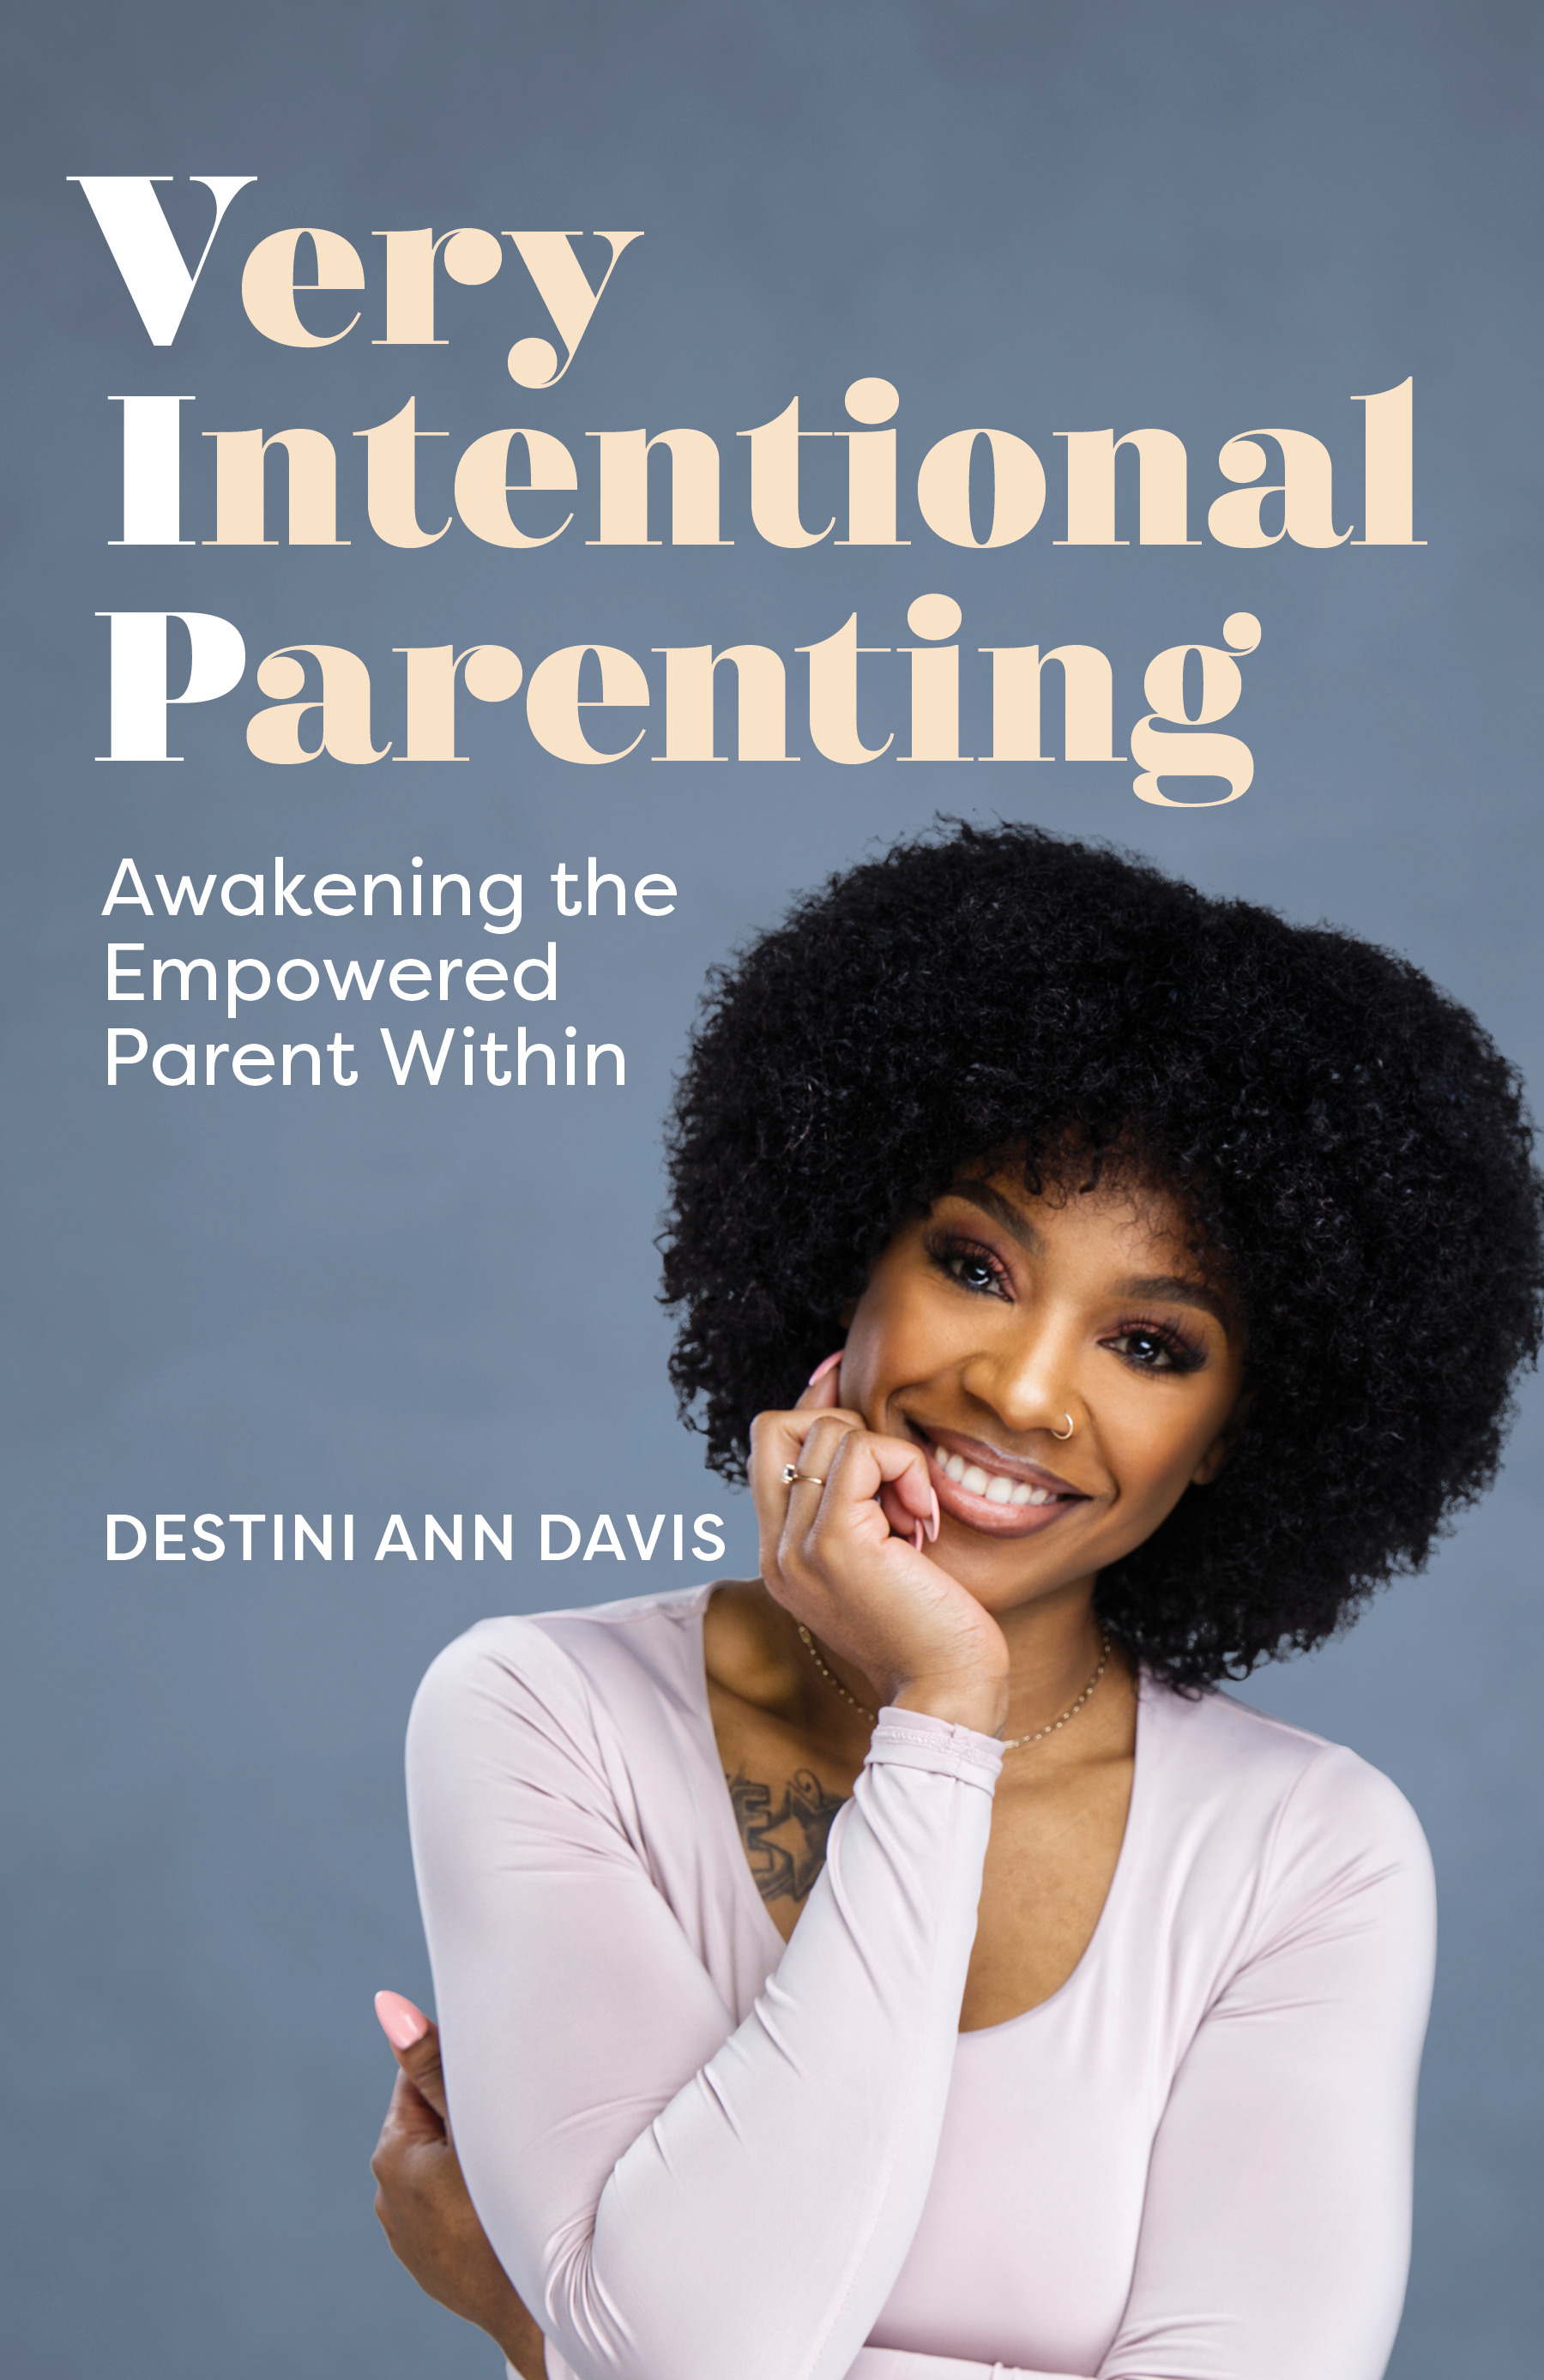 Very Intentional Parenting : Awakening the Empowered Parent Within | Parenting